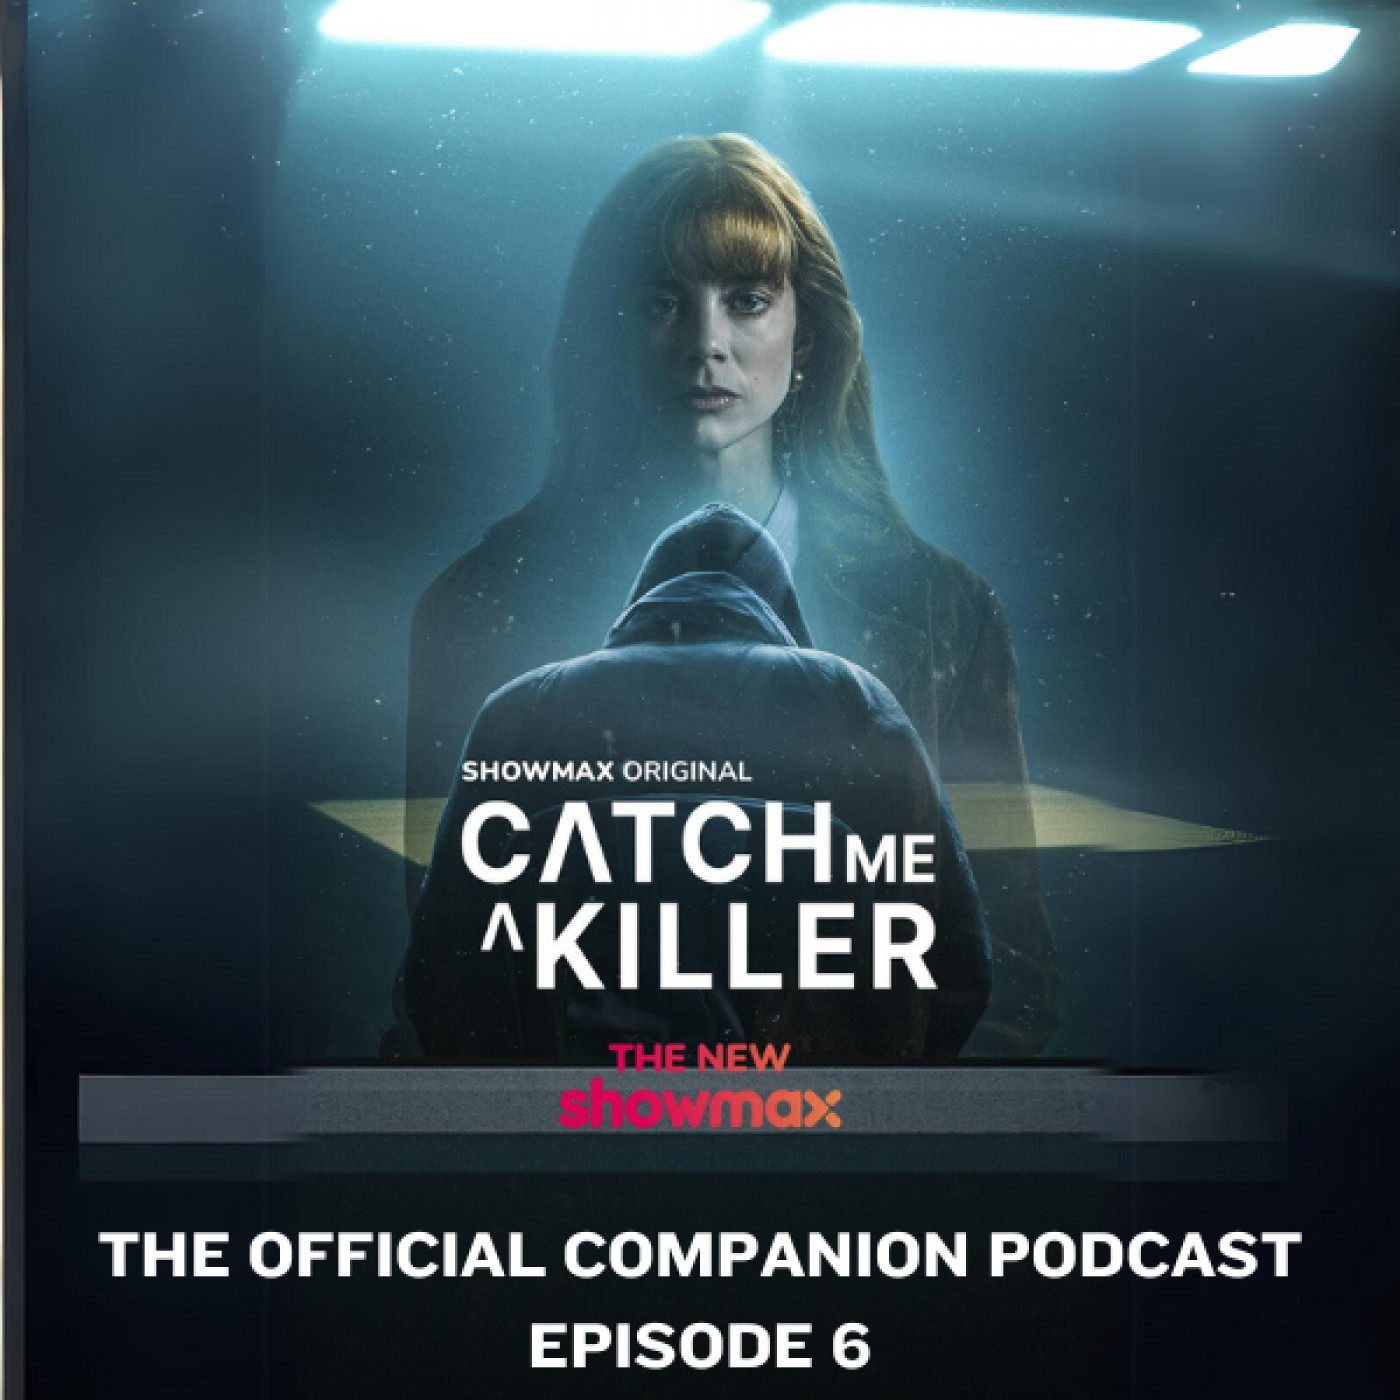 Catch Me A Killer: Official Companion Podcast Brought to you by Showmax (Episode 6)